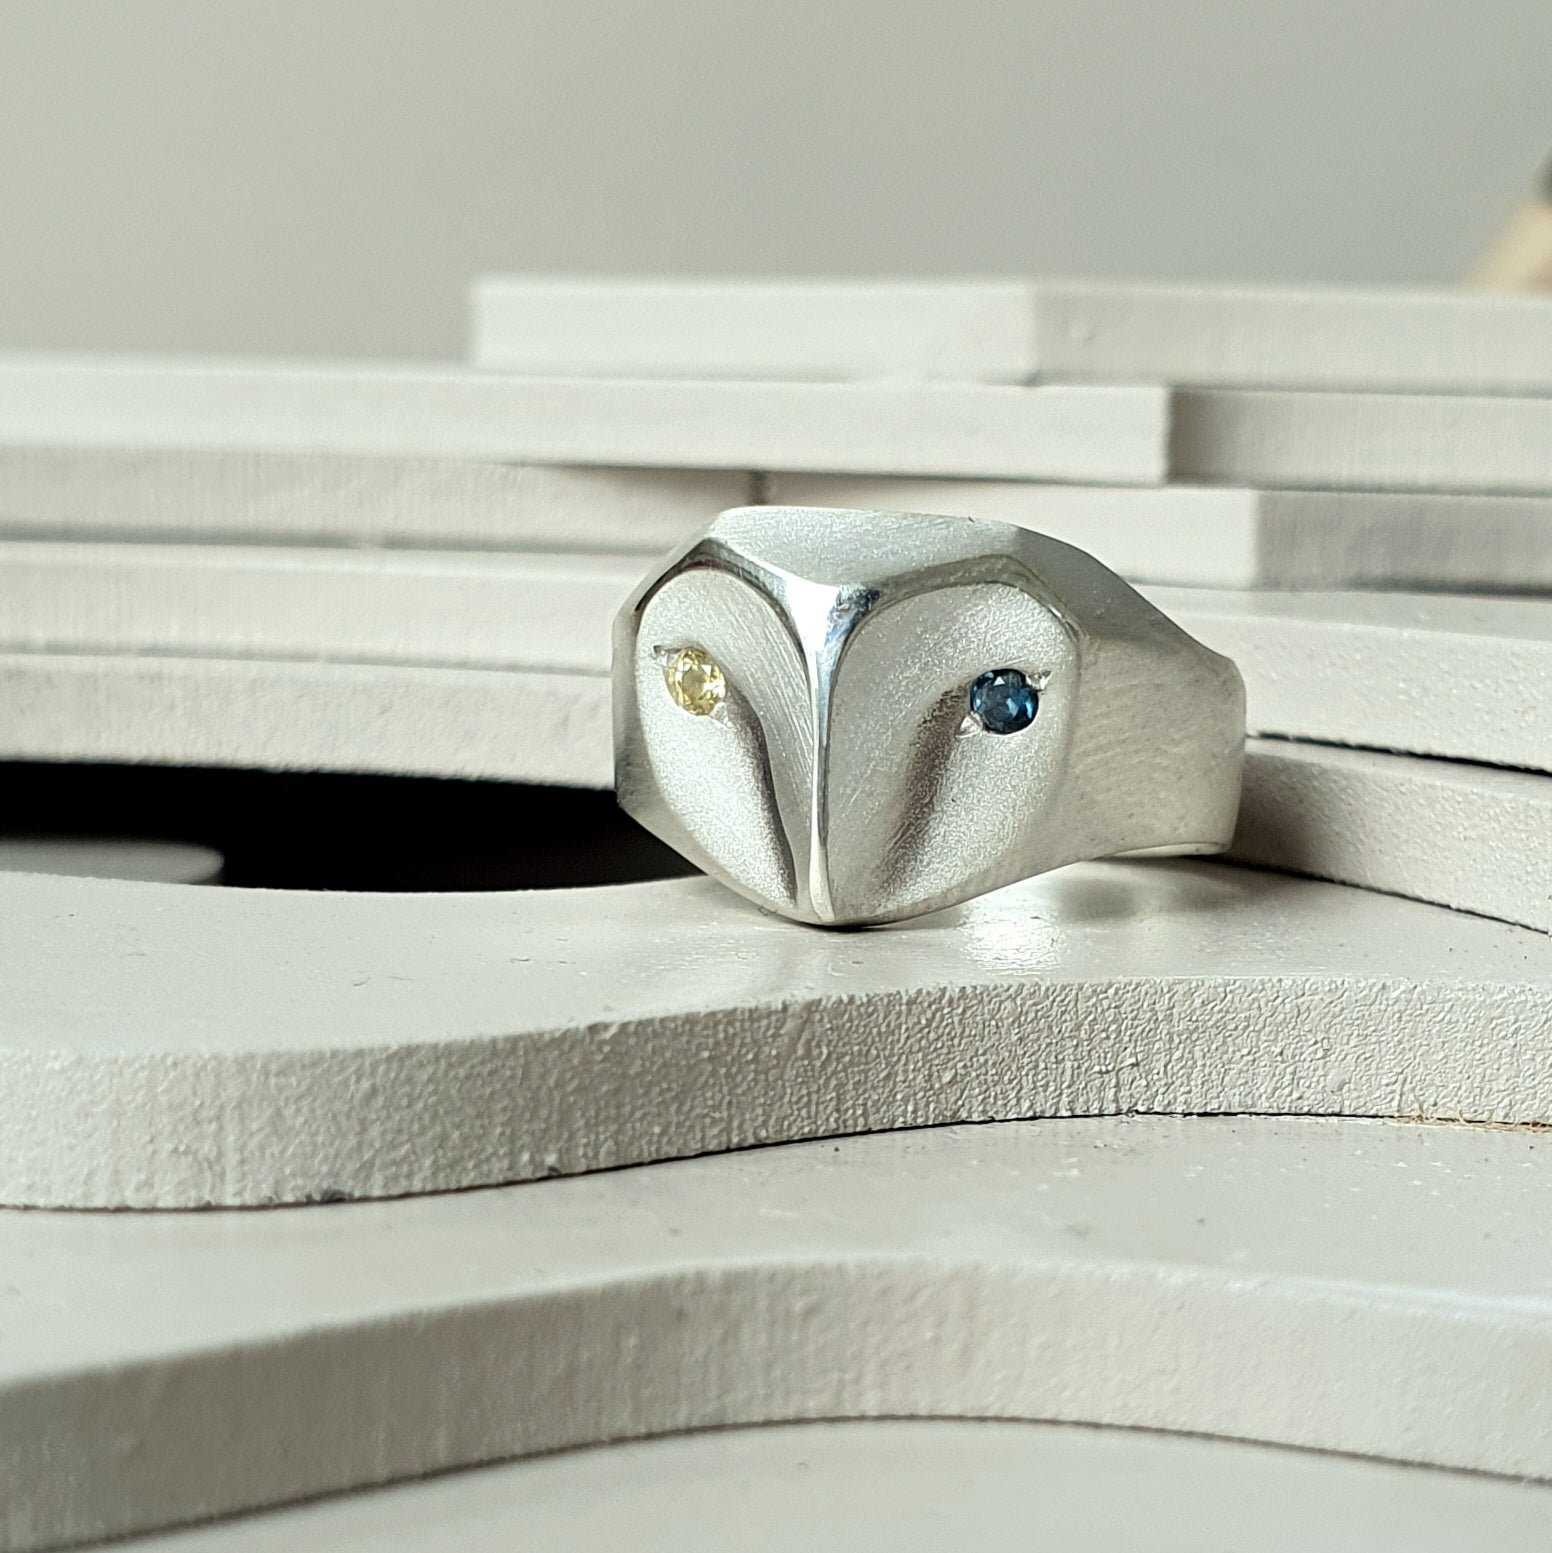 ___ Jewelry "support the people of ukraine" - Barn owl ring